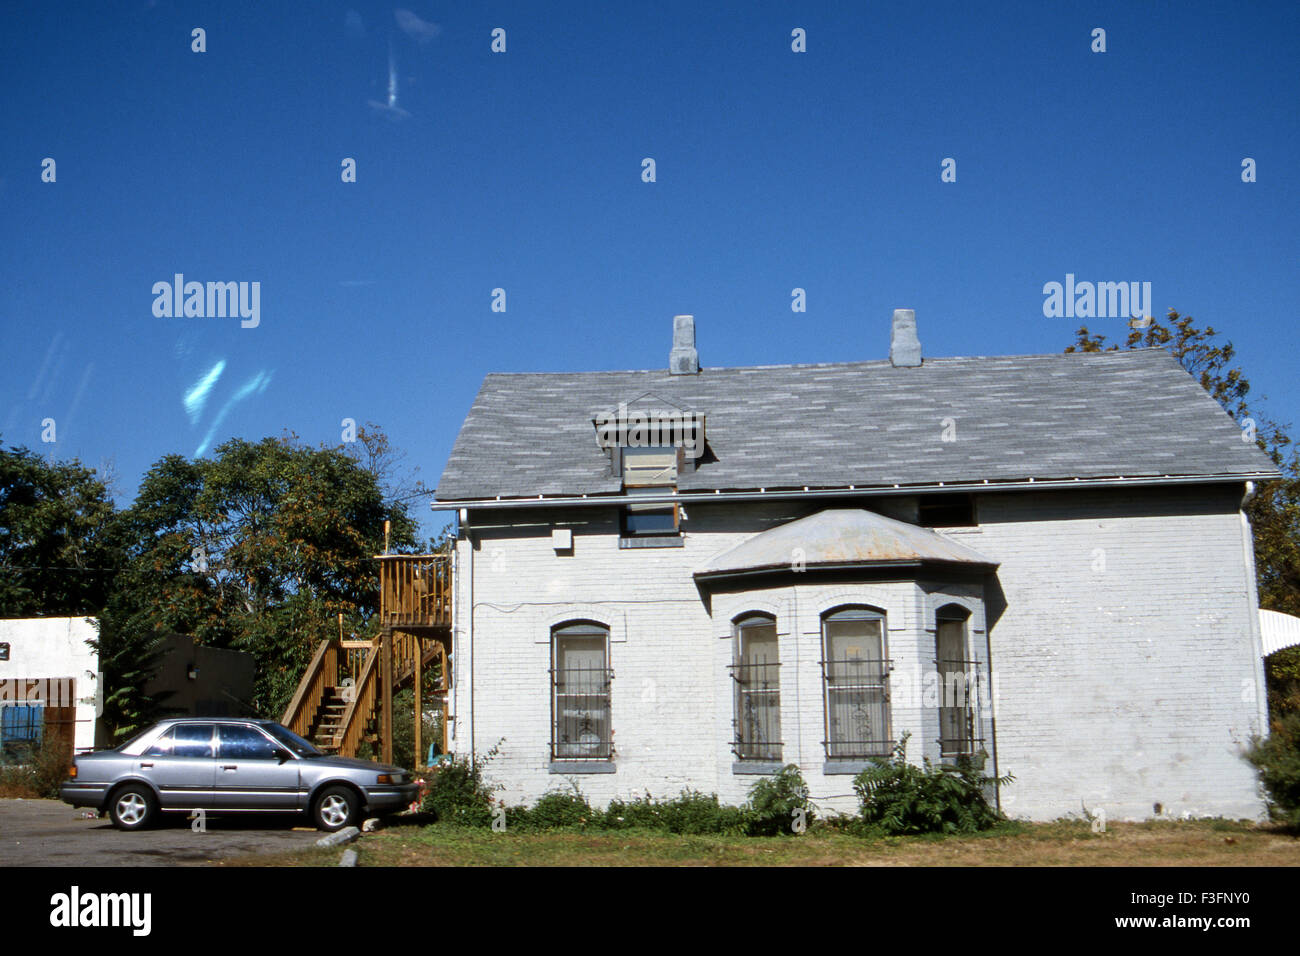 House built in early 19th century ; Old Denver city ; U.S.A. United States of America Stock Photo